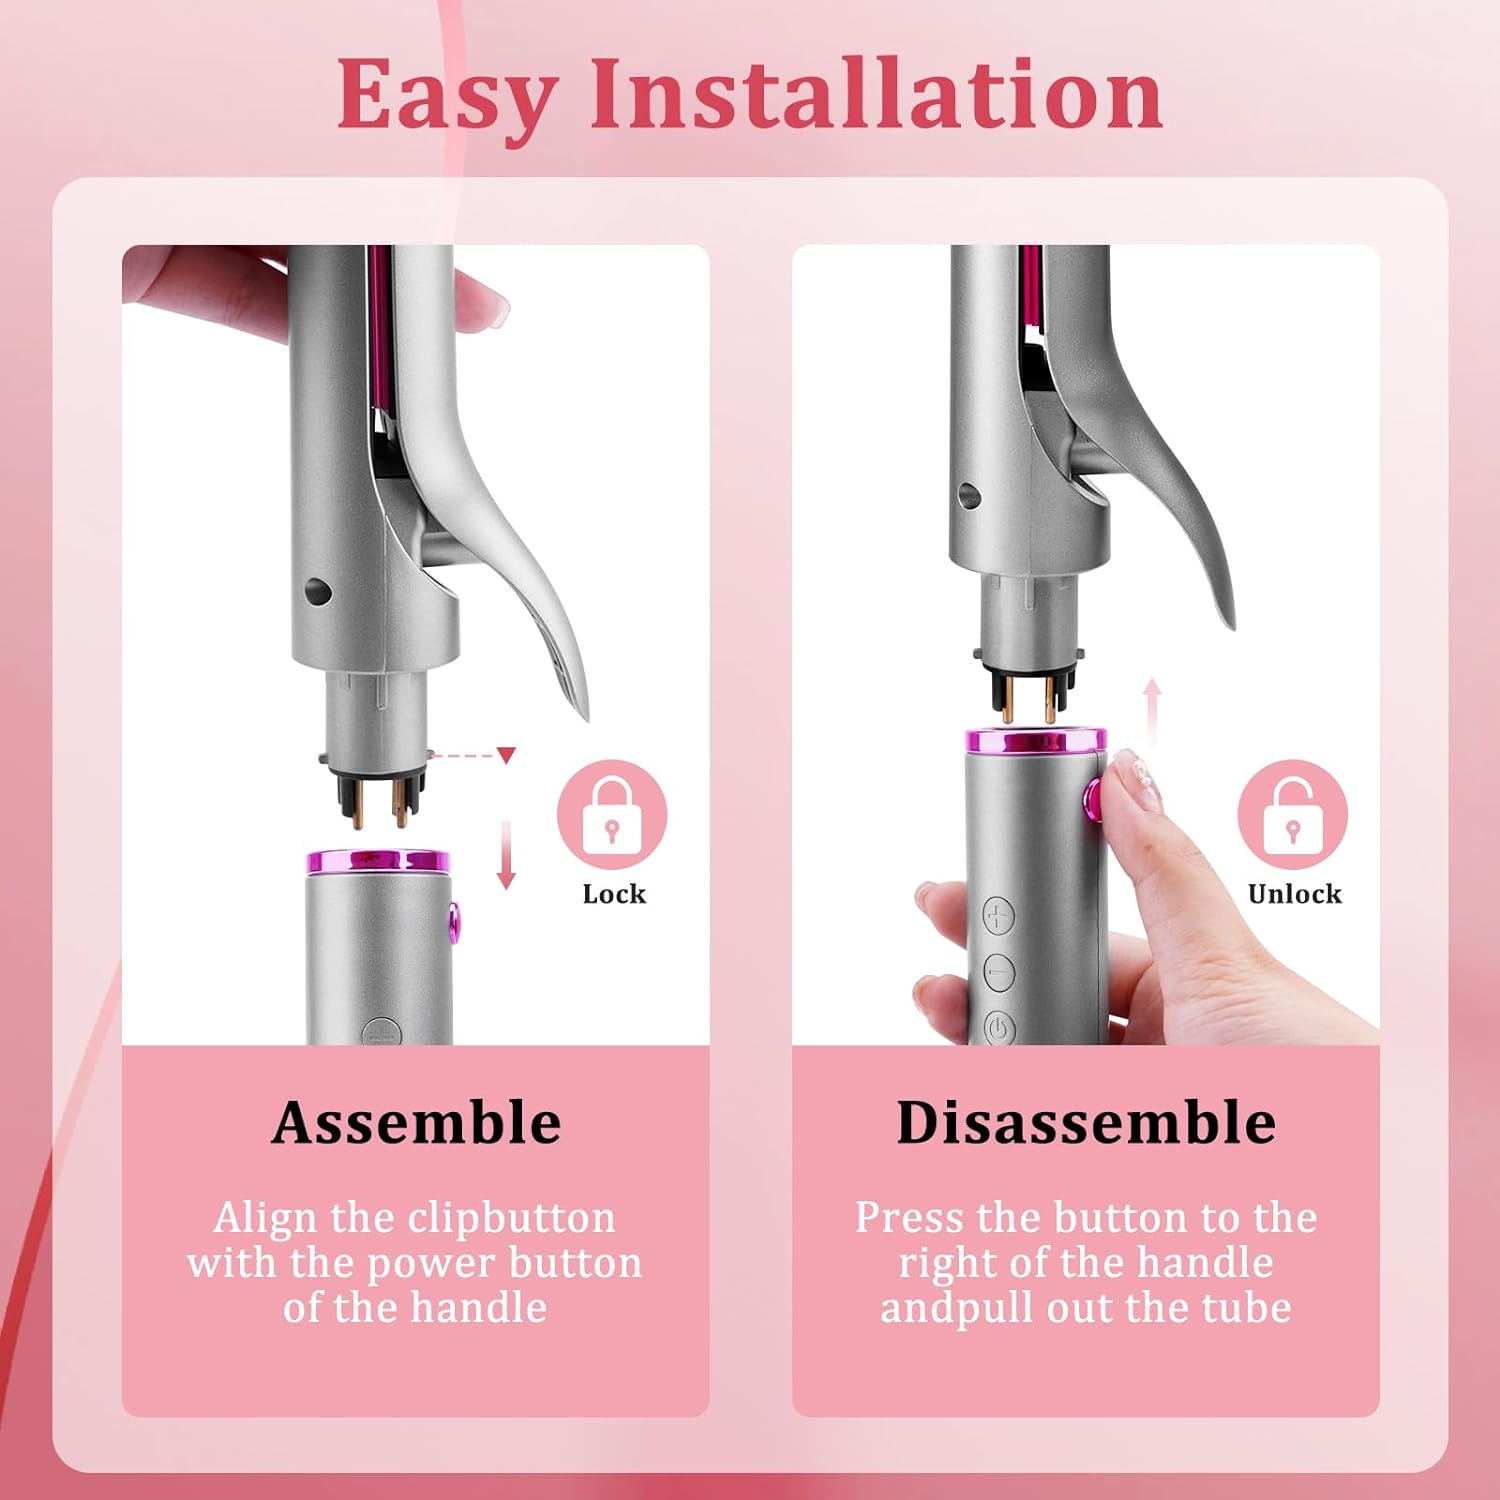 Hotodeal 4 in 1 Curling Iron Set- Hair Straightening Clamps and Comb, 30s Fast Heat Curling Iron for All Hair Types